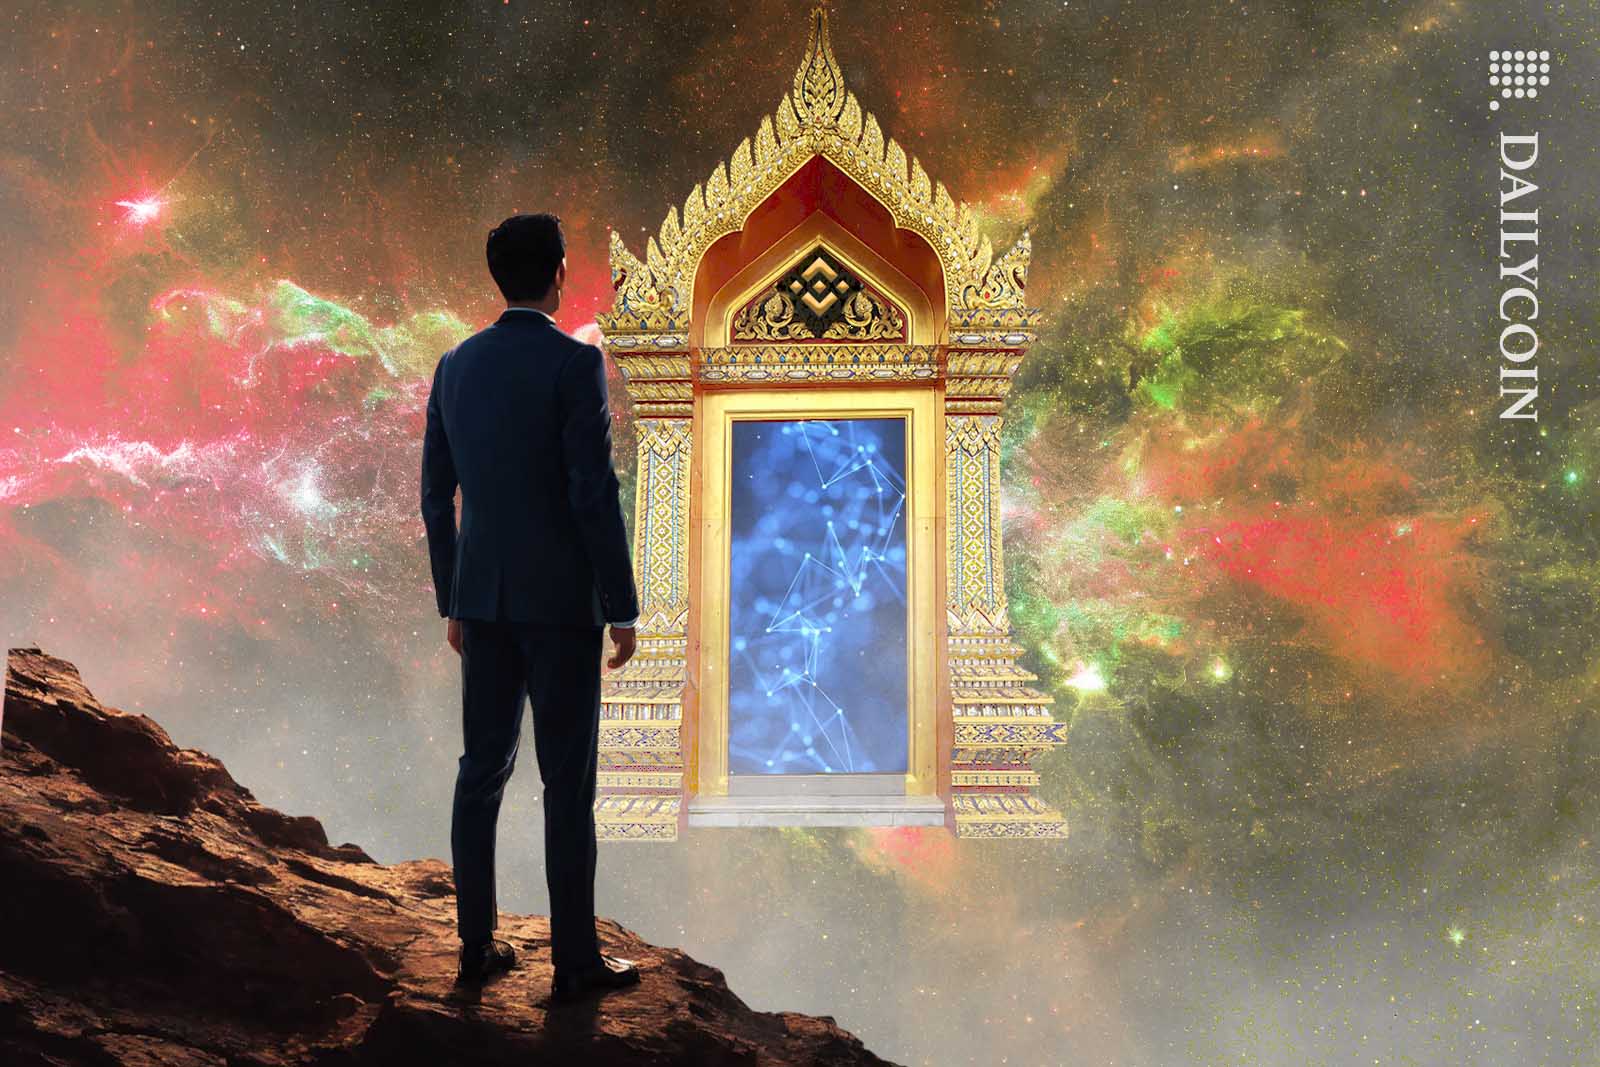 Man in suit staring at an open Thai style door with a Binance logo on it in space.